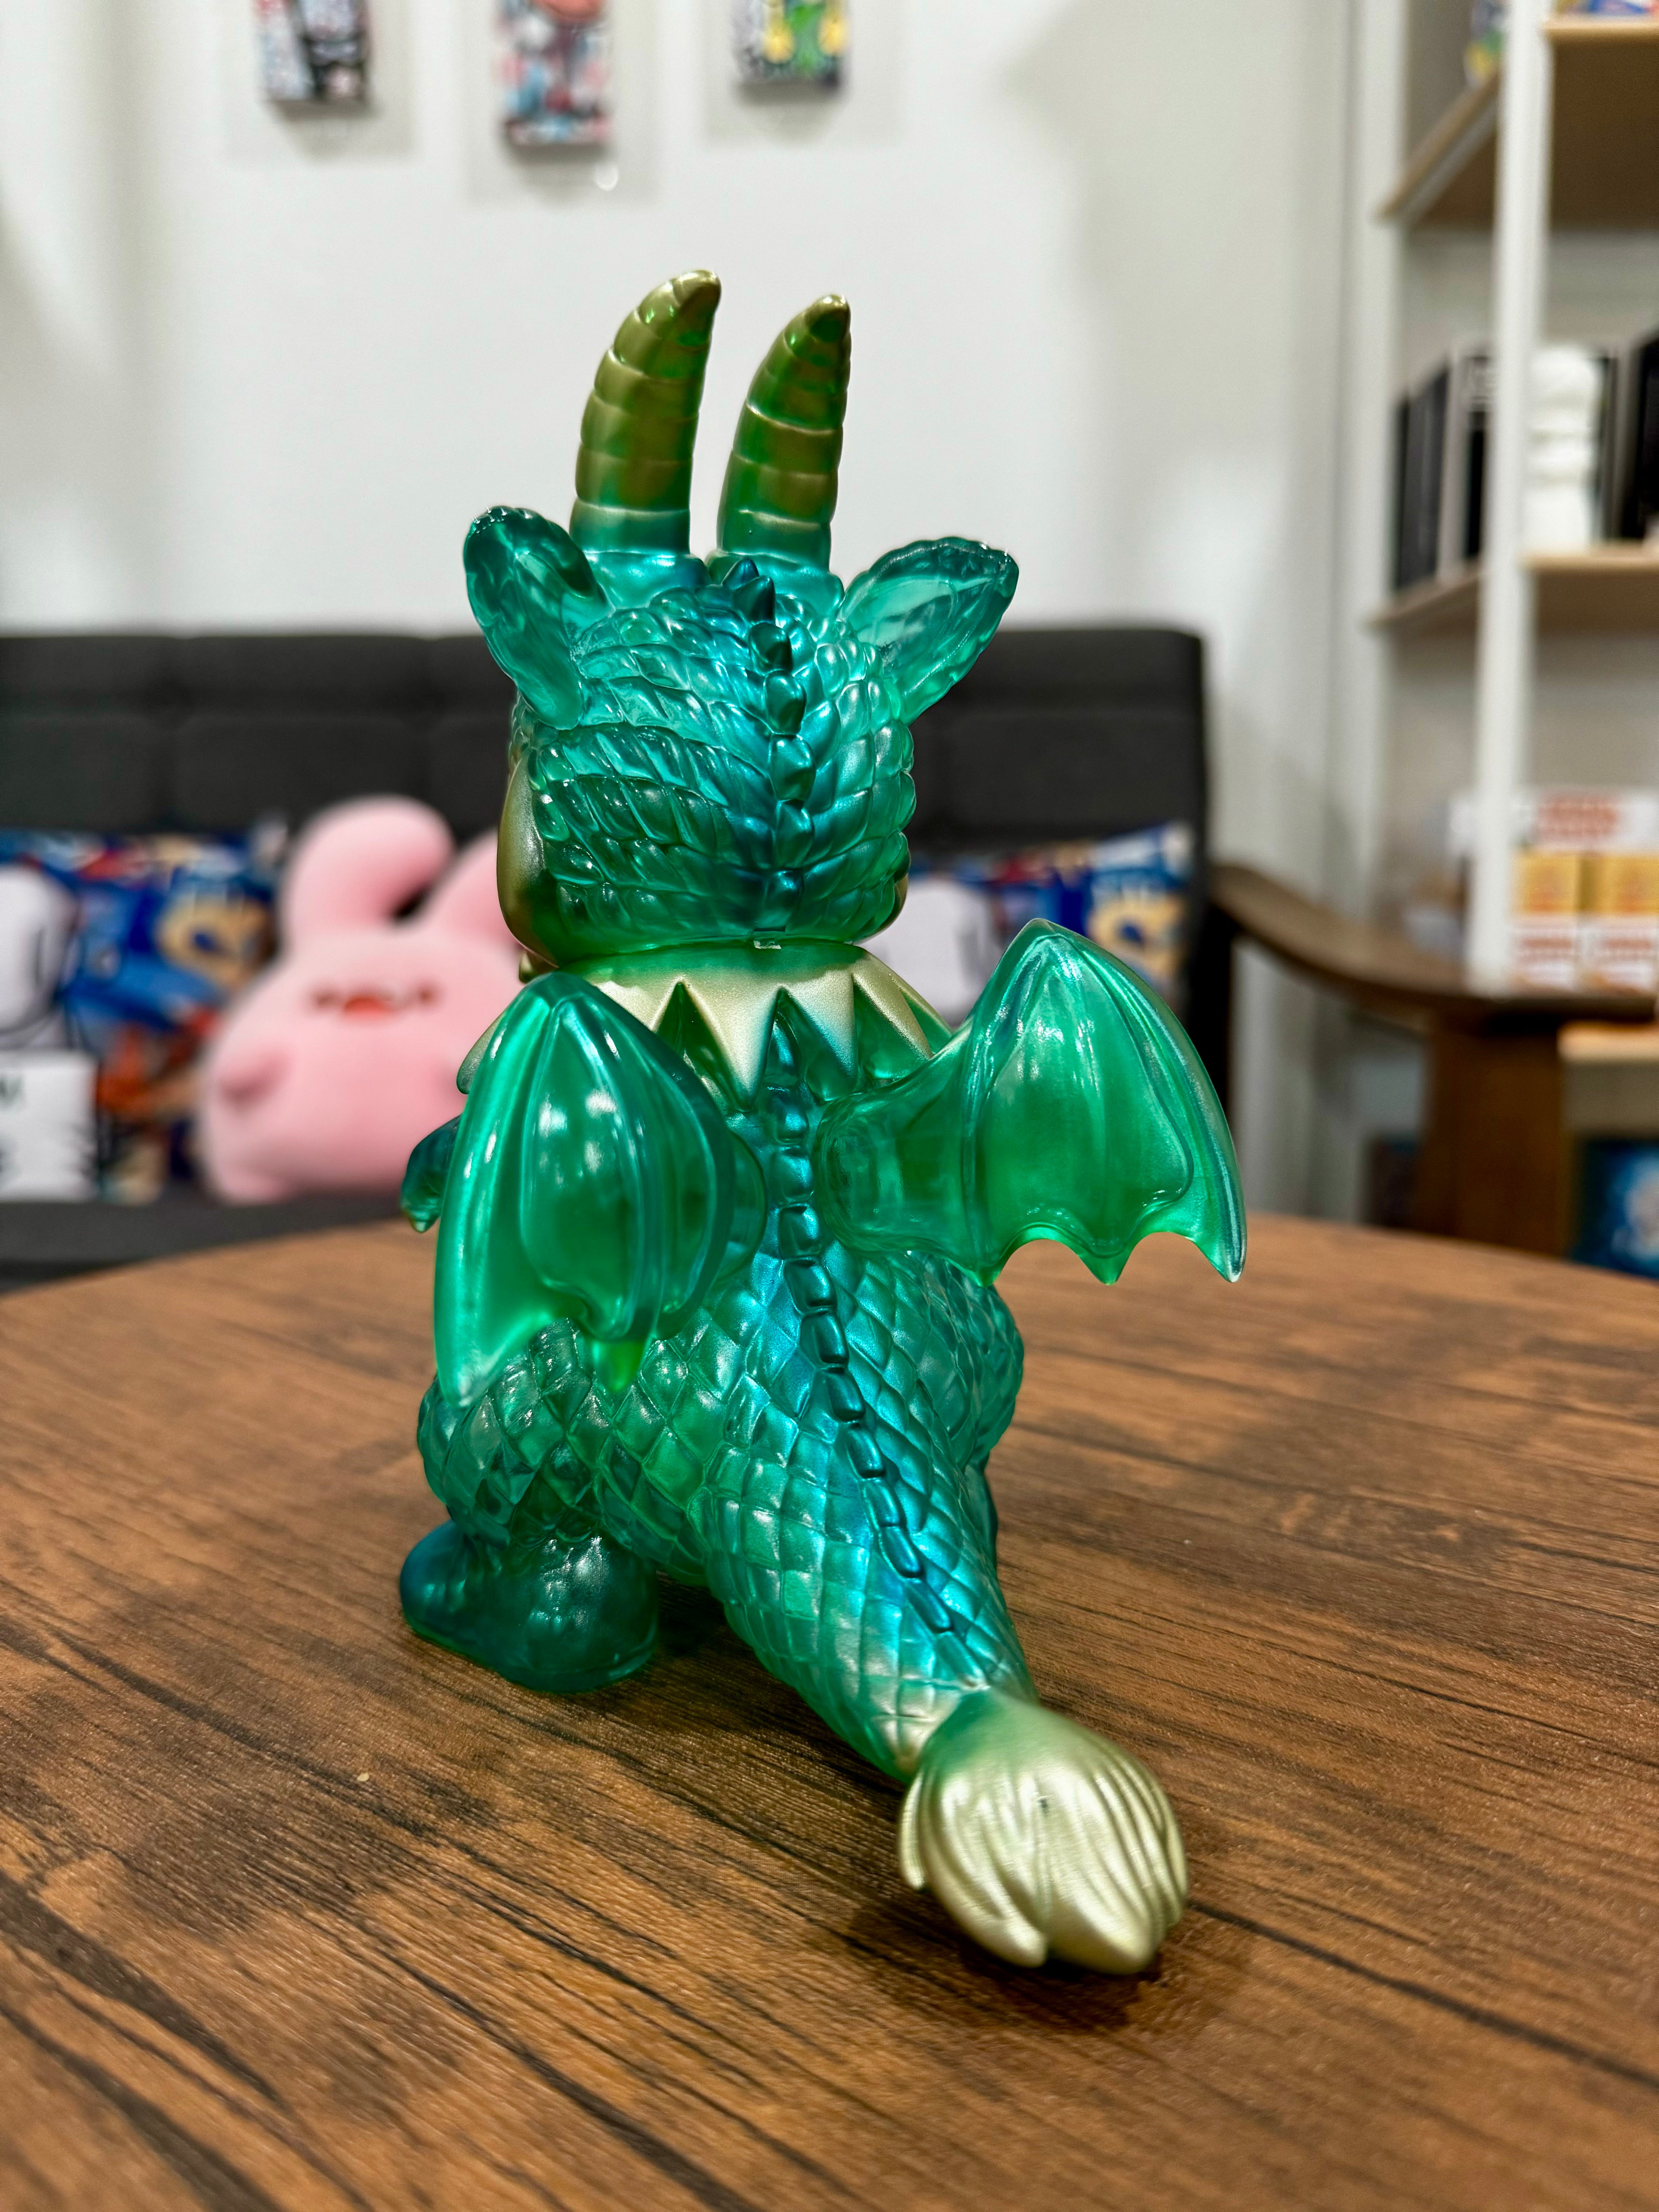 A green dragon toy figurine named Calm Dragon Clear Mint by Art Junkie on a wooden surface. From Strangecat Toys, a blind box and art toy store.